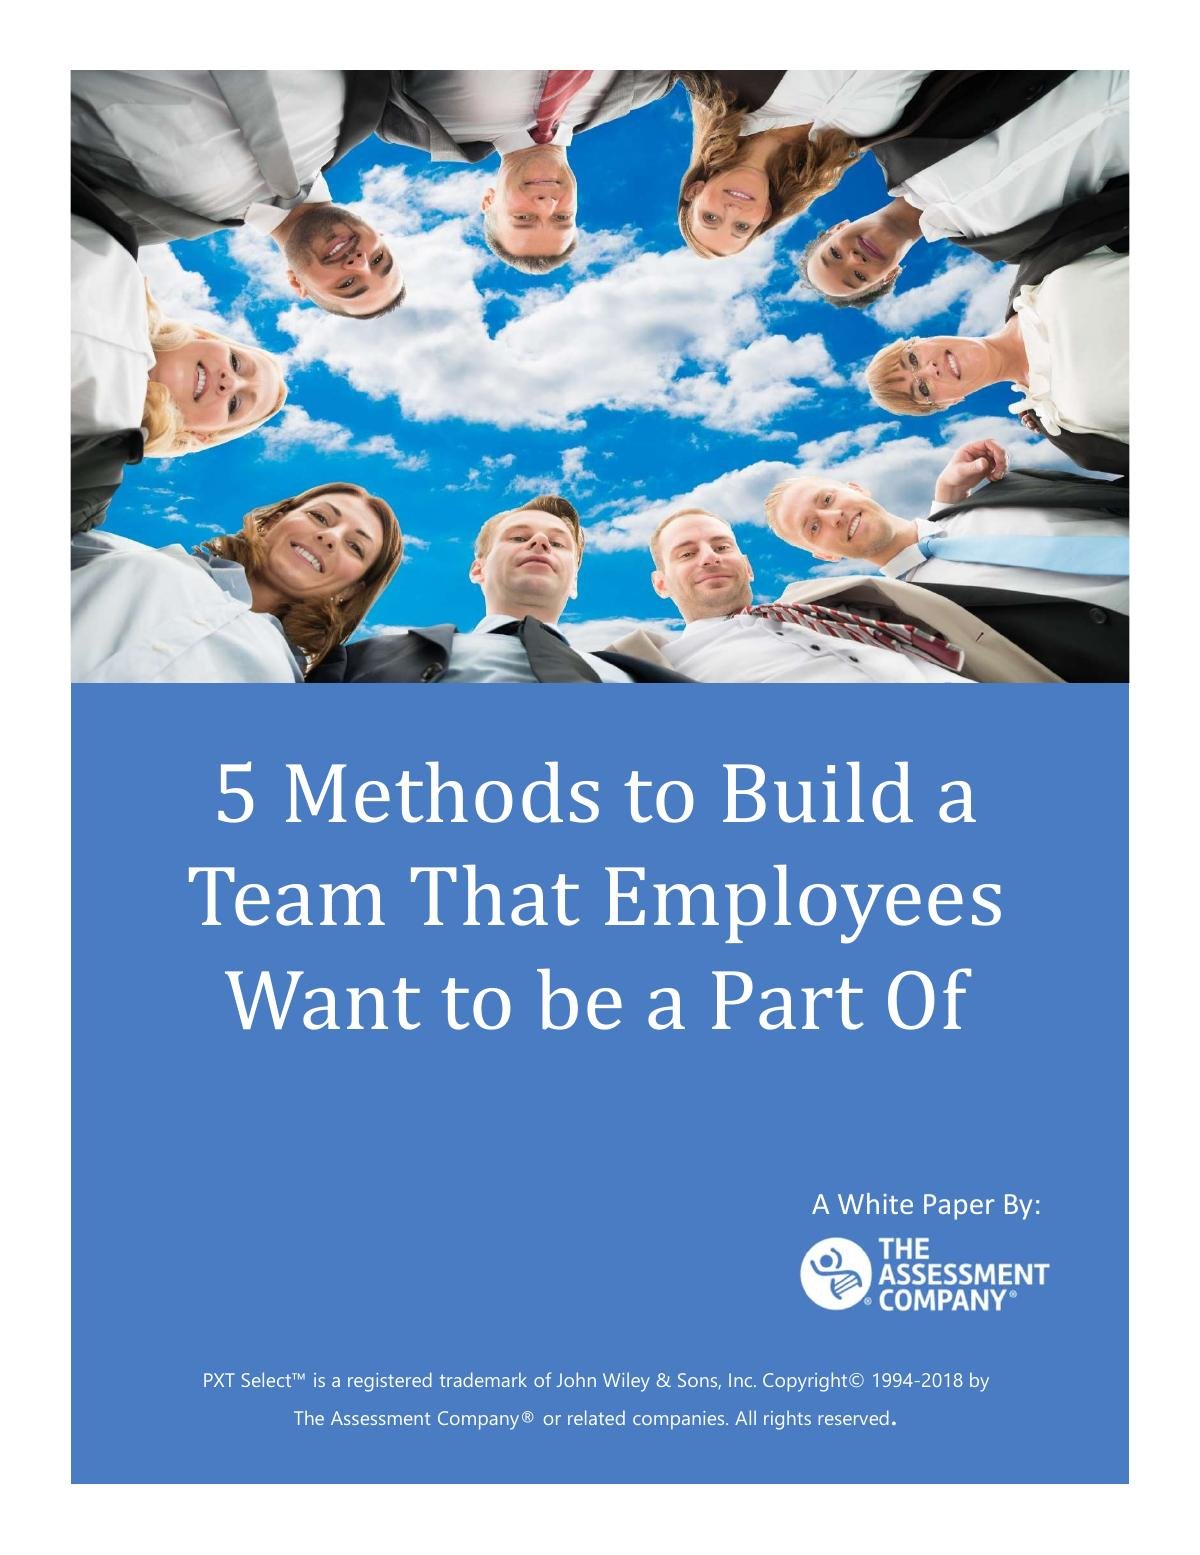 5 Methods to Build a Team That Employees Want to be a Part Of